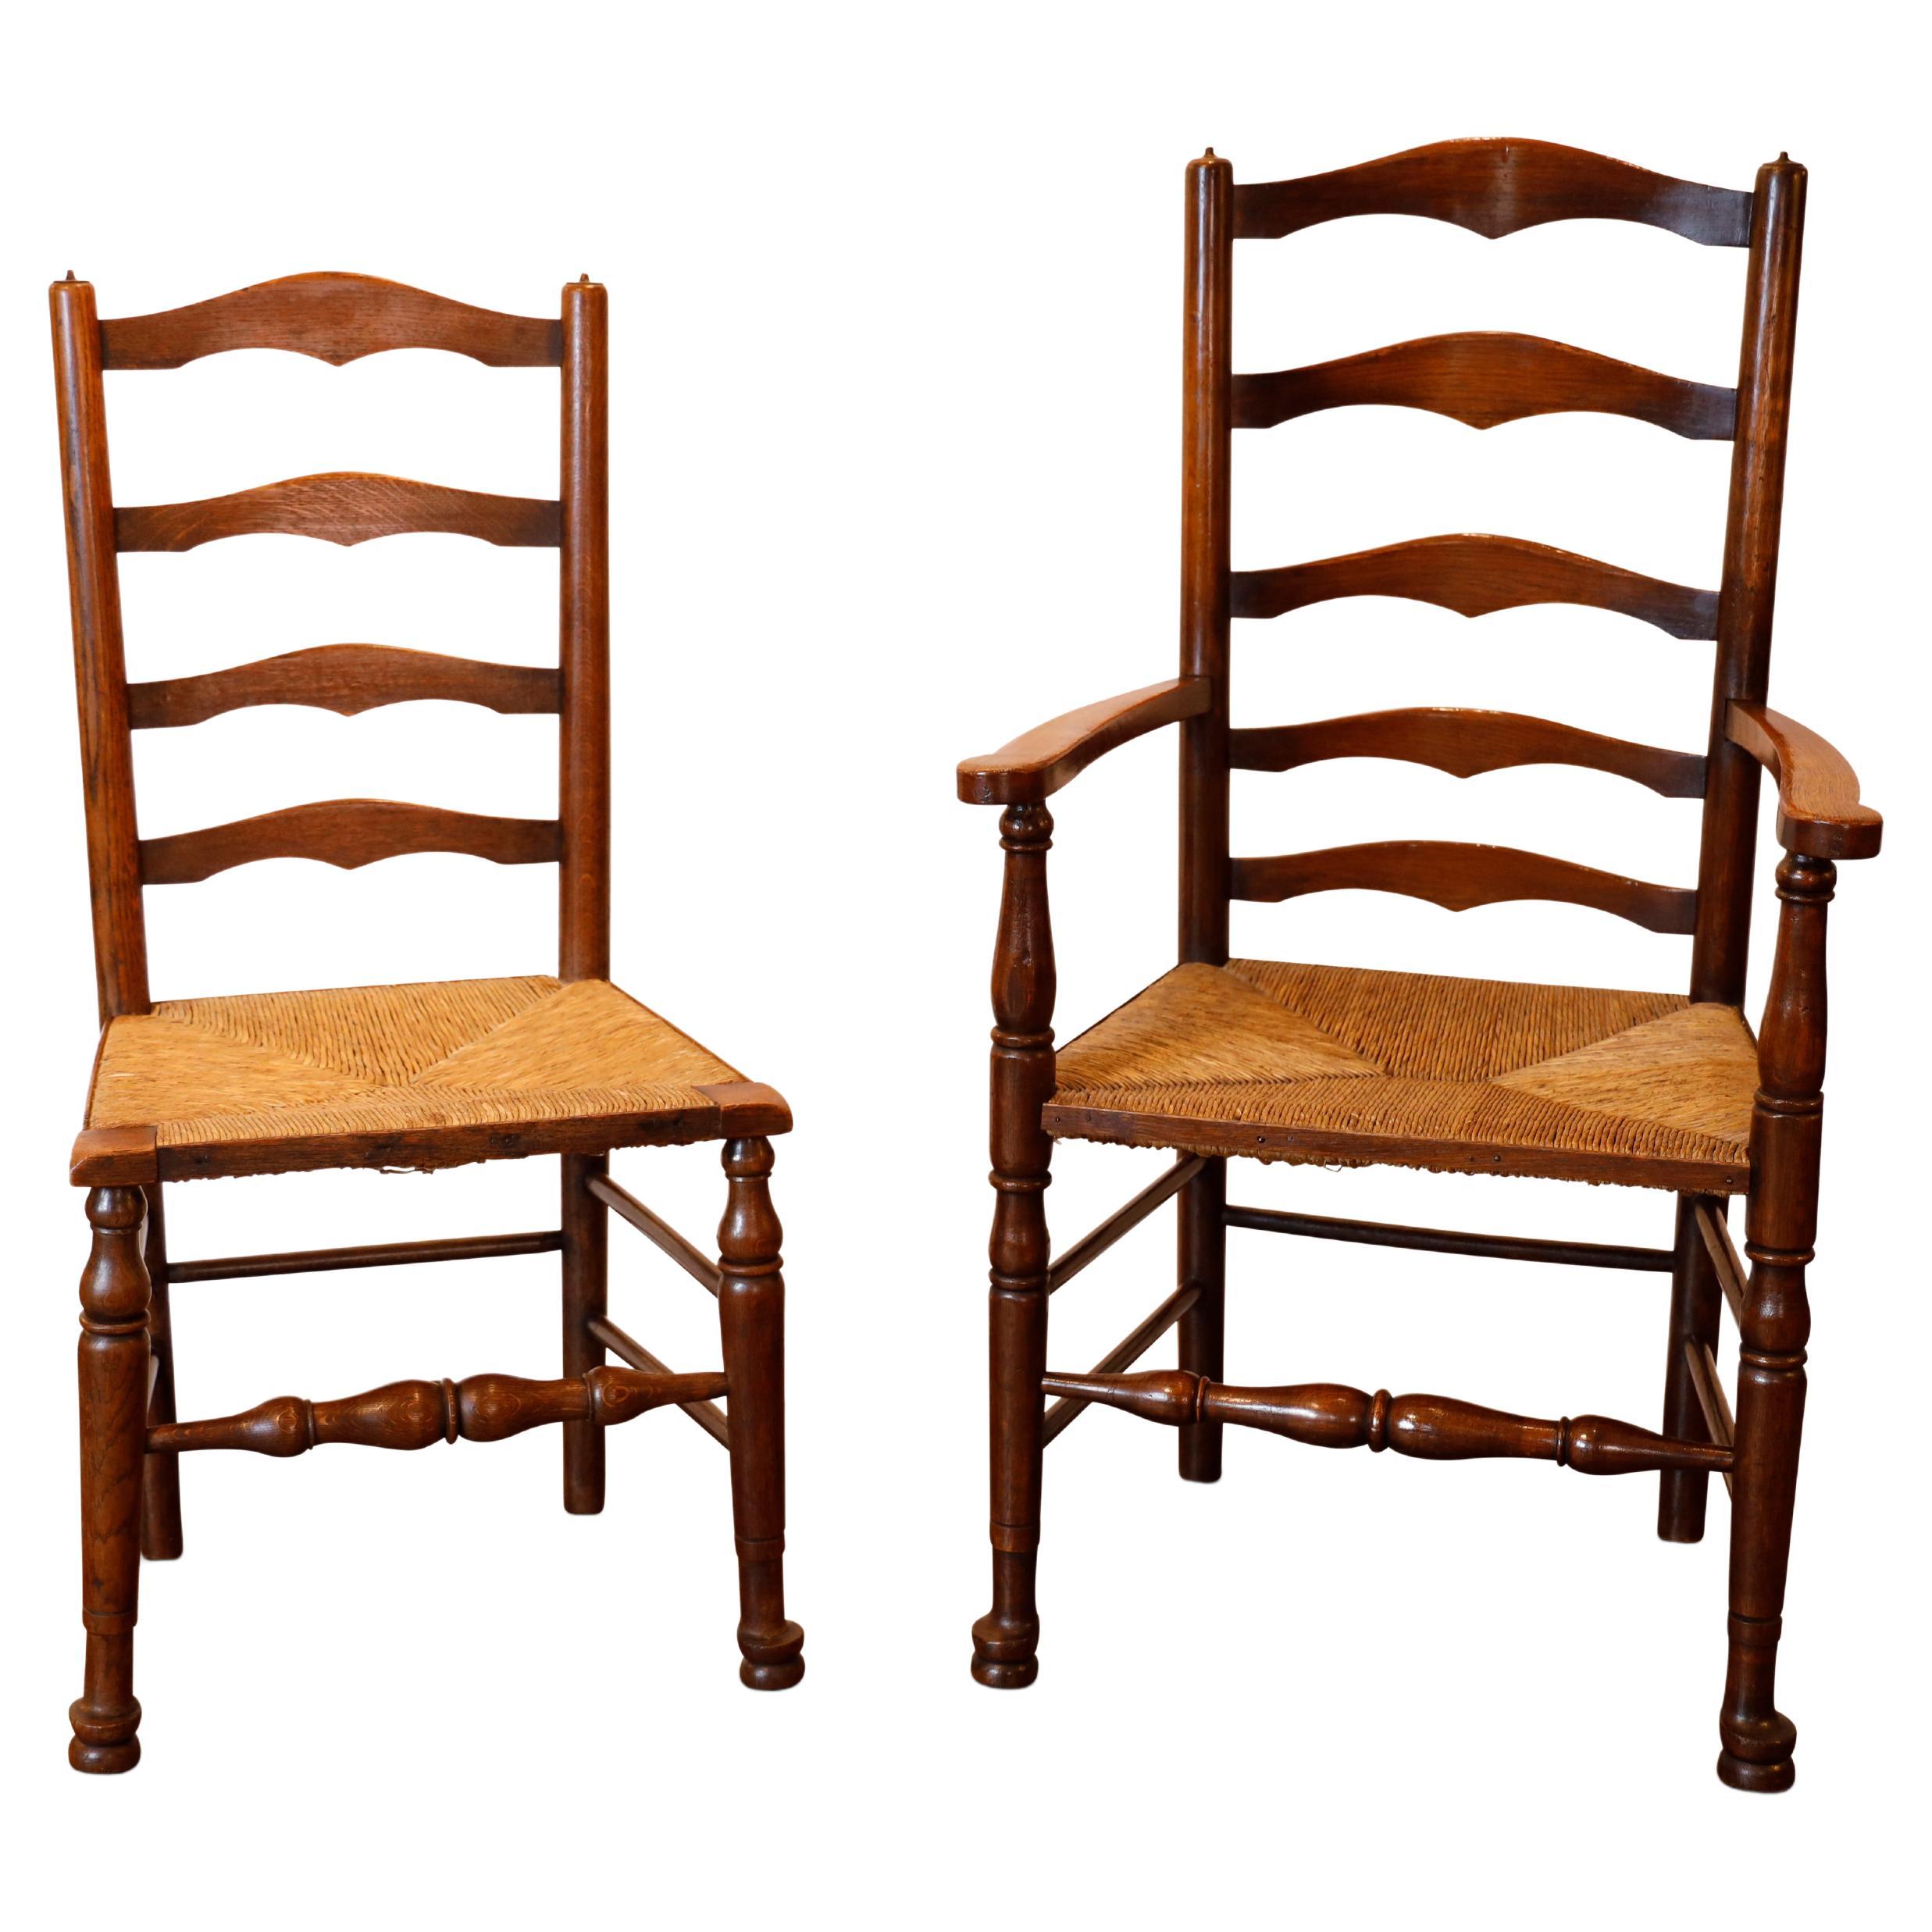 English Ladder Back Chairs For Sale